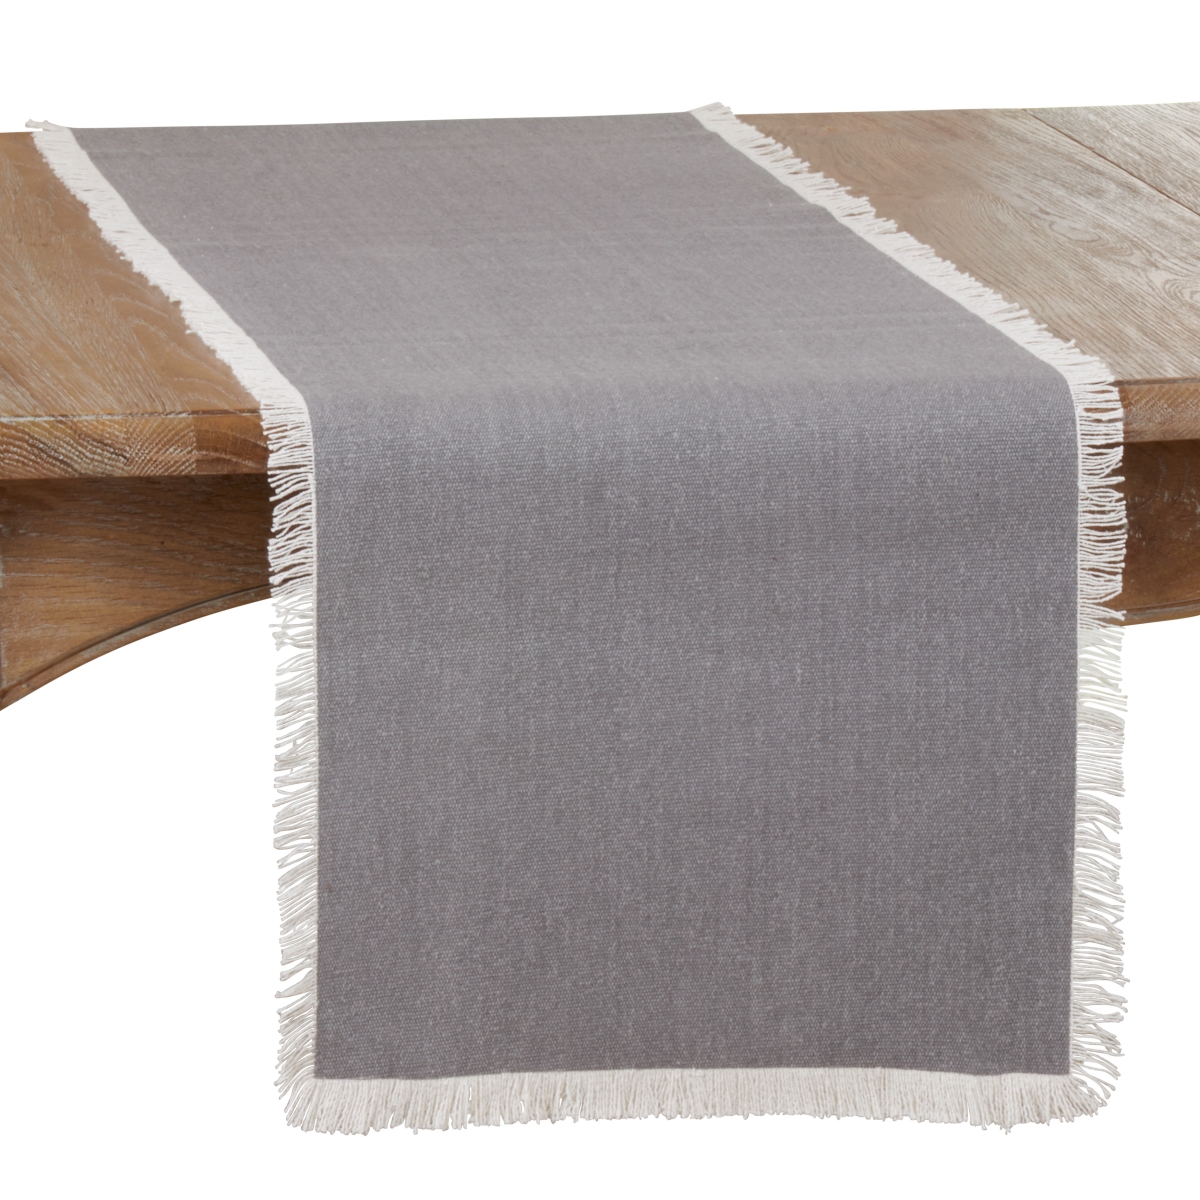 Picture of SARO 443.GY1672B Table Runner with Fringe Border Design